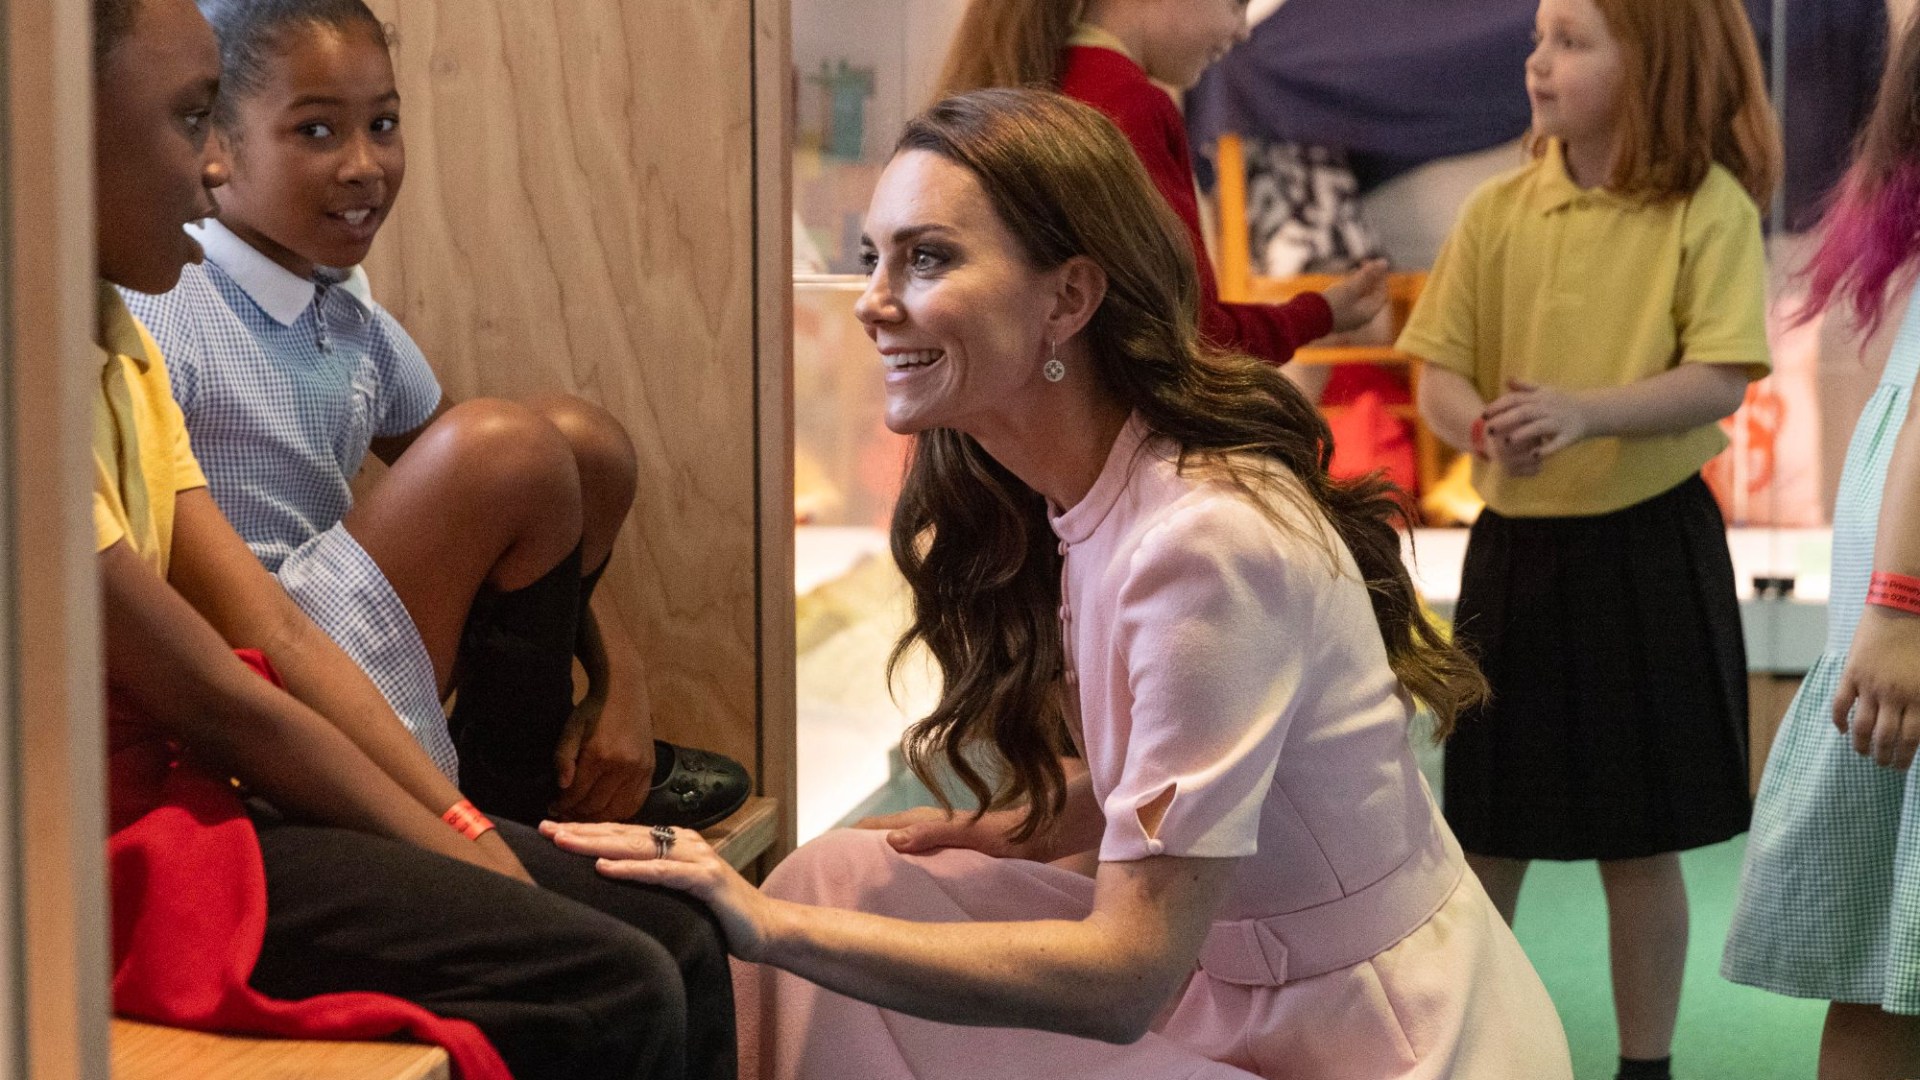 Excited Princess Kate was driving force behind new project – but wont return to work until docs give green light [Video]